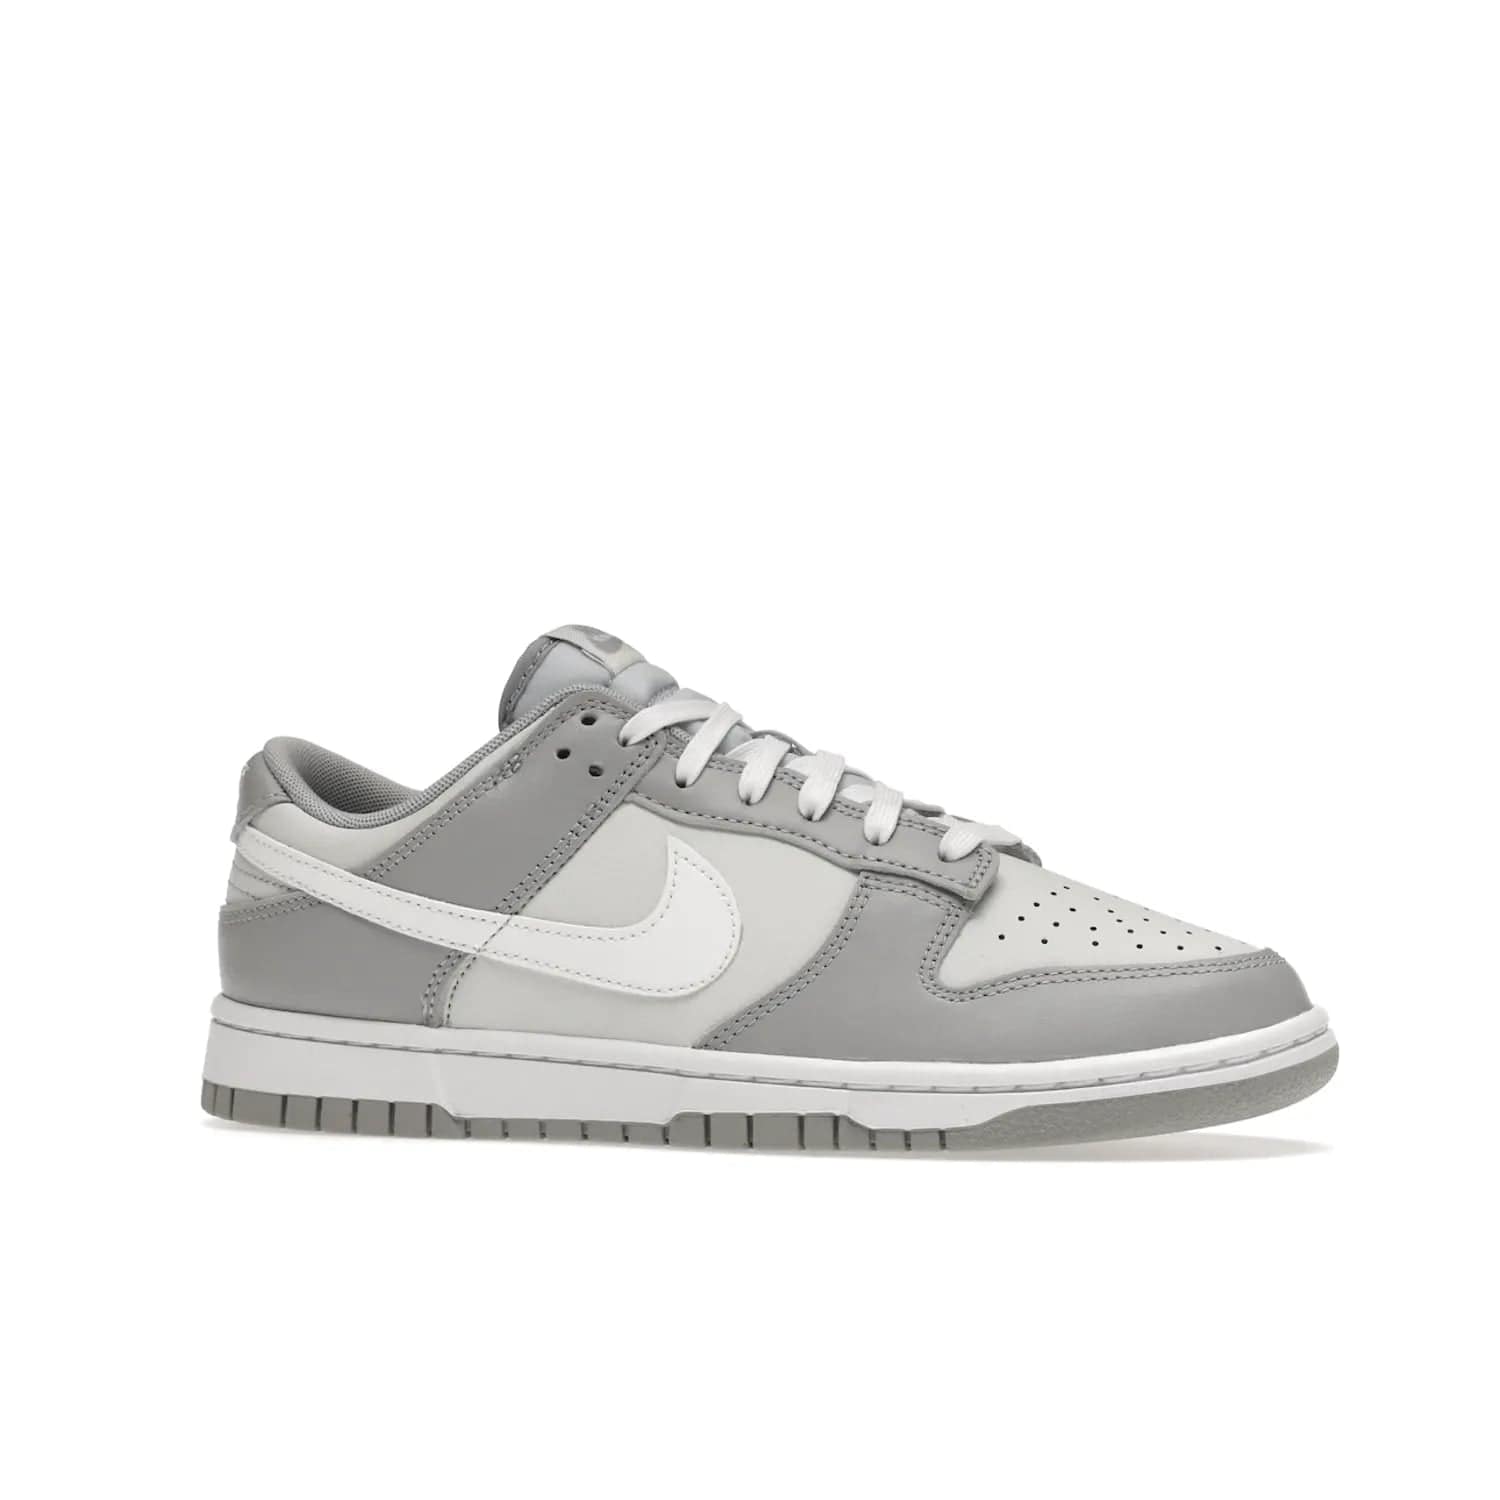 Nike Dunk Low Two Tone Grey - Image 3 - Only at www.BallersClubKickz.com - Fresh Nike Dunk Low Two Tone Grey leather/overlay Sneaker. White Swoosh detailing, nylon tongue, woven label and Air Sole. Get yours and stay on the trend.